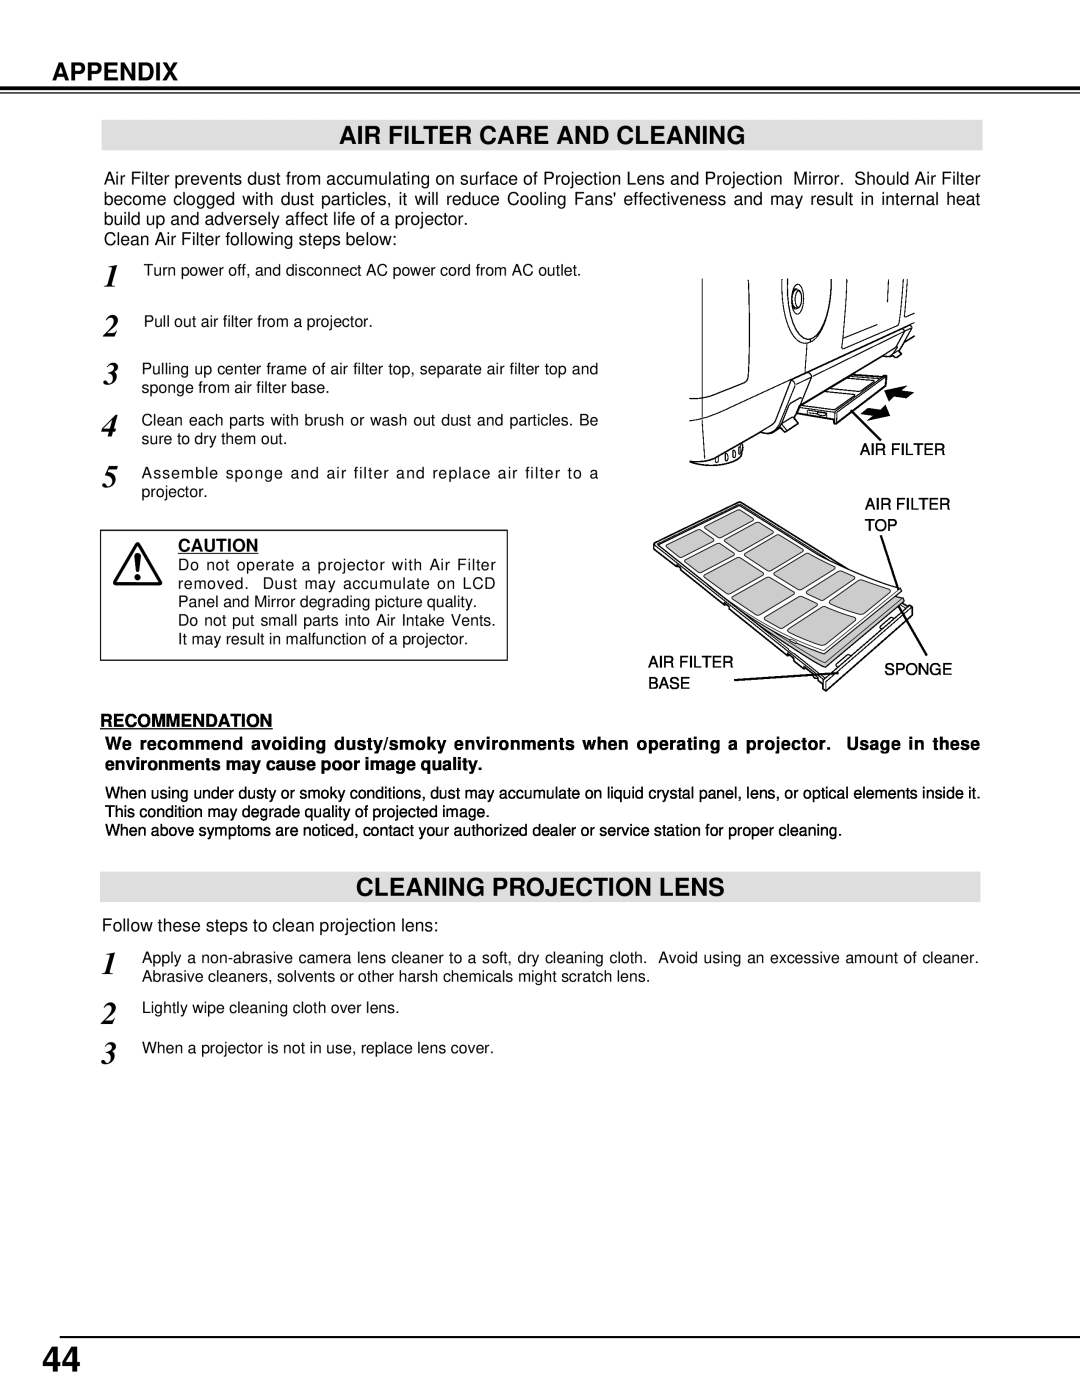 Eiki LC-UXT1 instruction manual Appendix Air Filter Care And Cleaning, Cleaning Projection Lens, Recommendation 